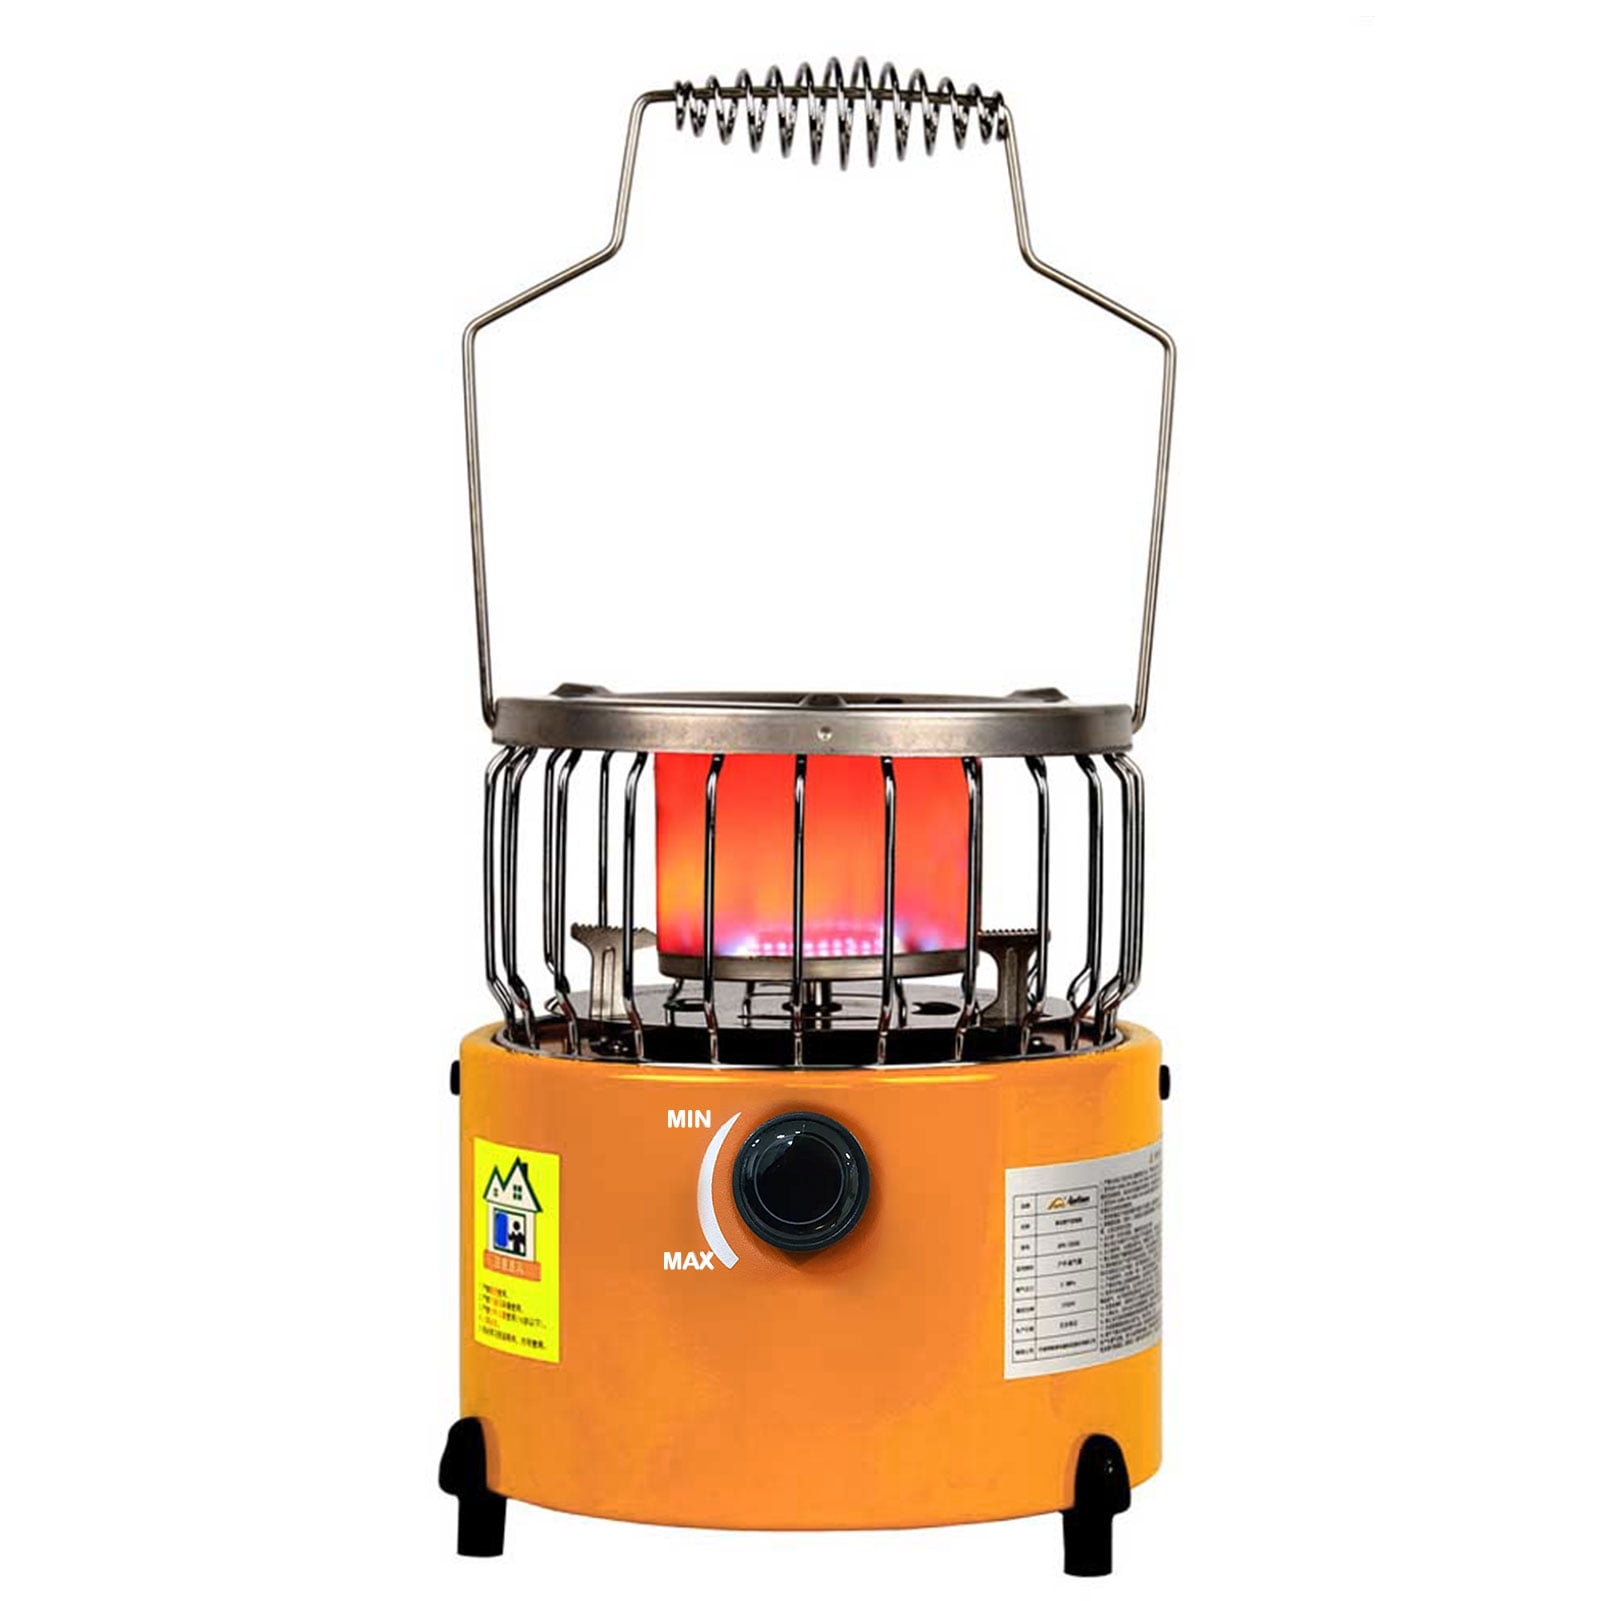 Lixada Outdoor Camping Gas Heater Portable Dual Purpose Gas Heating Warmer Cooking Stove Indoor/Outdoor-Safe Portable Propane Radiant Heater